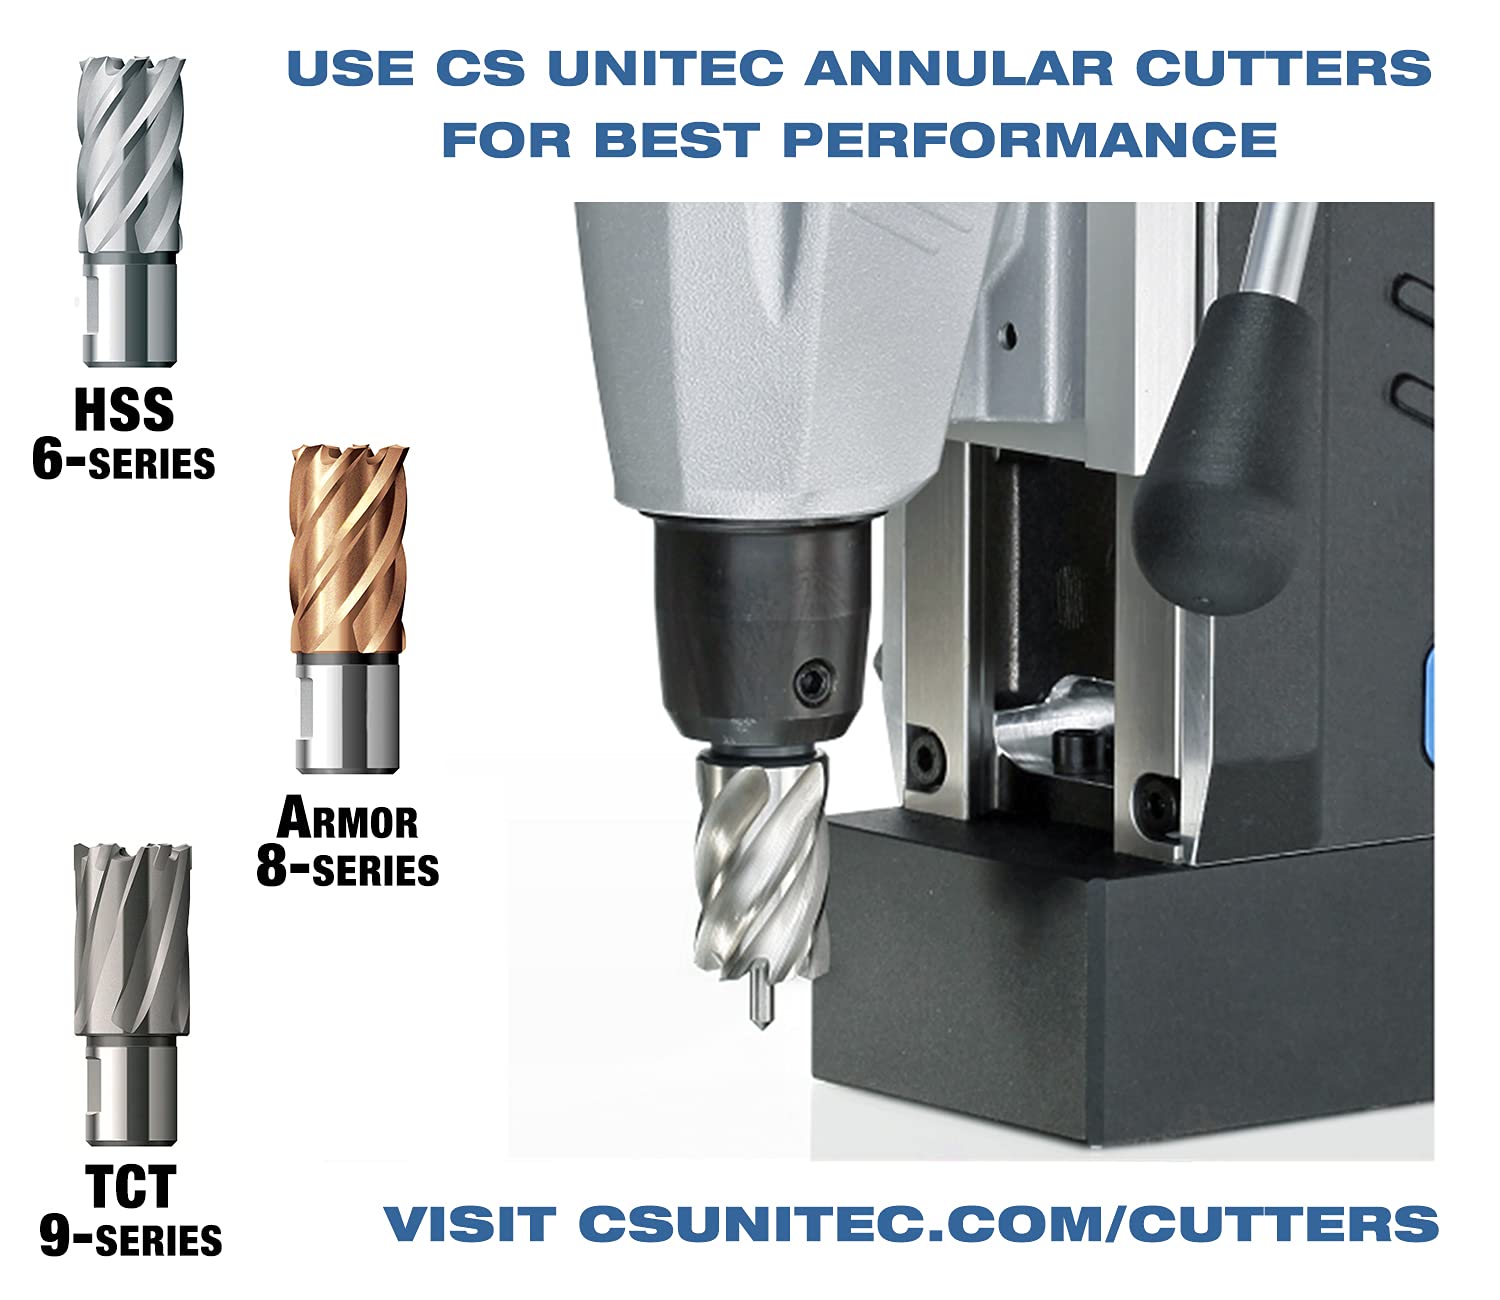 C.S. Unitec MABasic 450 Portable Magnetic Drill Press | 1150W 2-Speed Benchtop Power Drill Machine w/up to 1-3/4